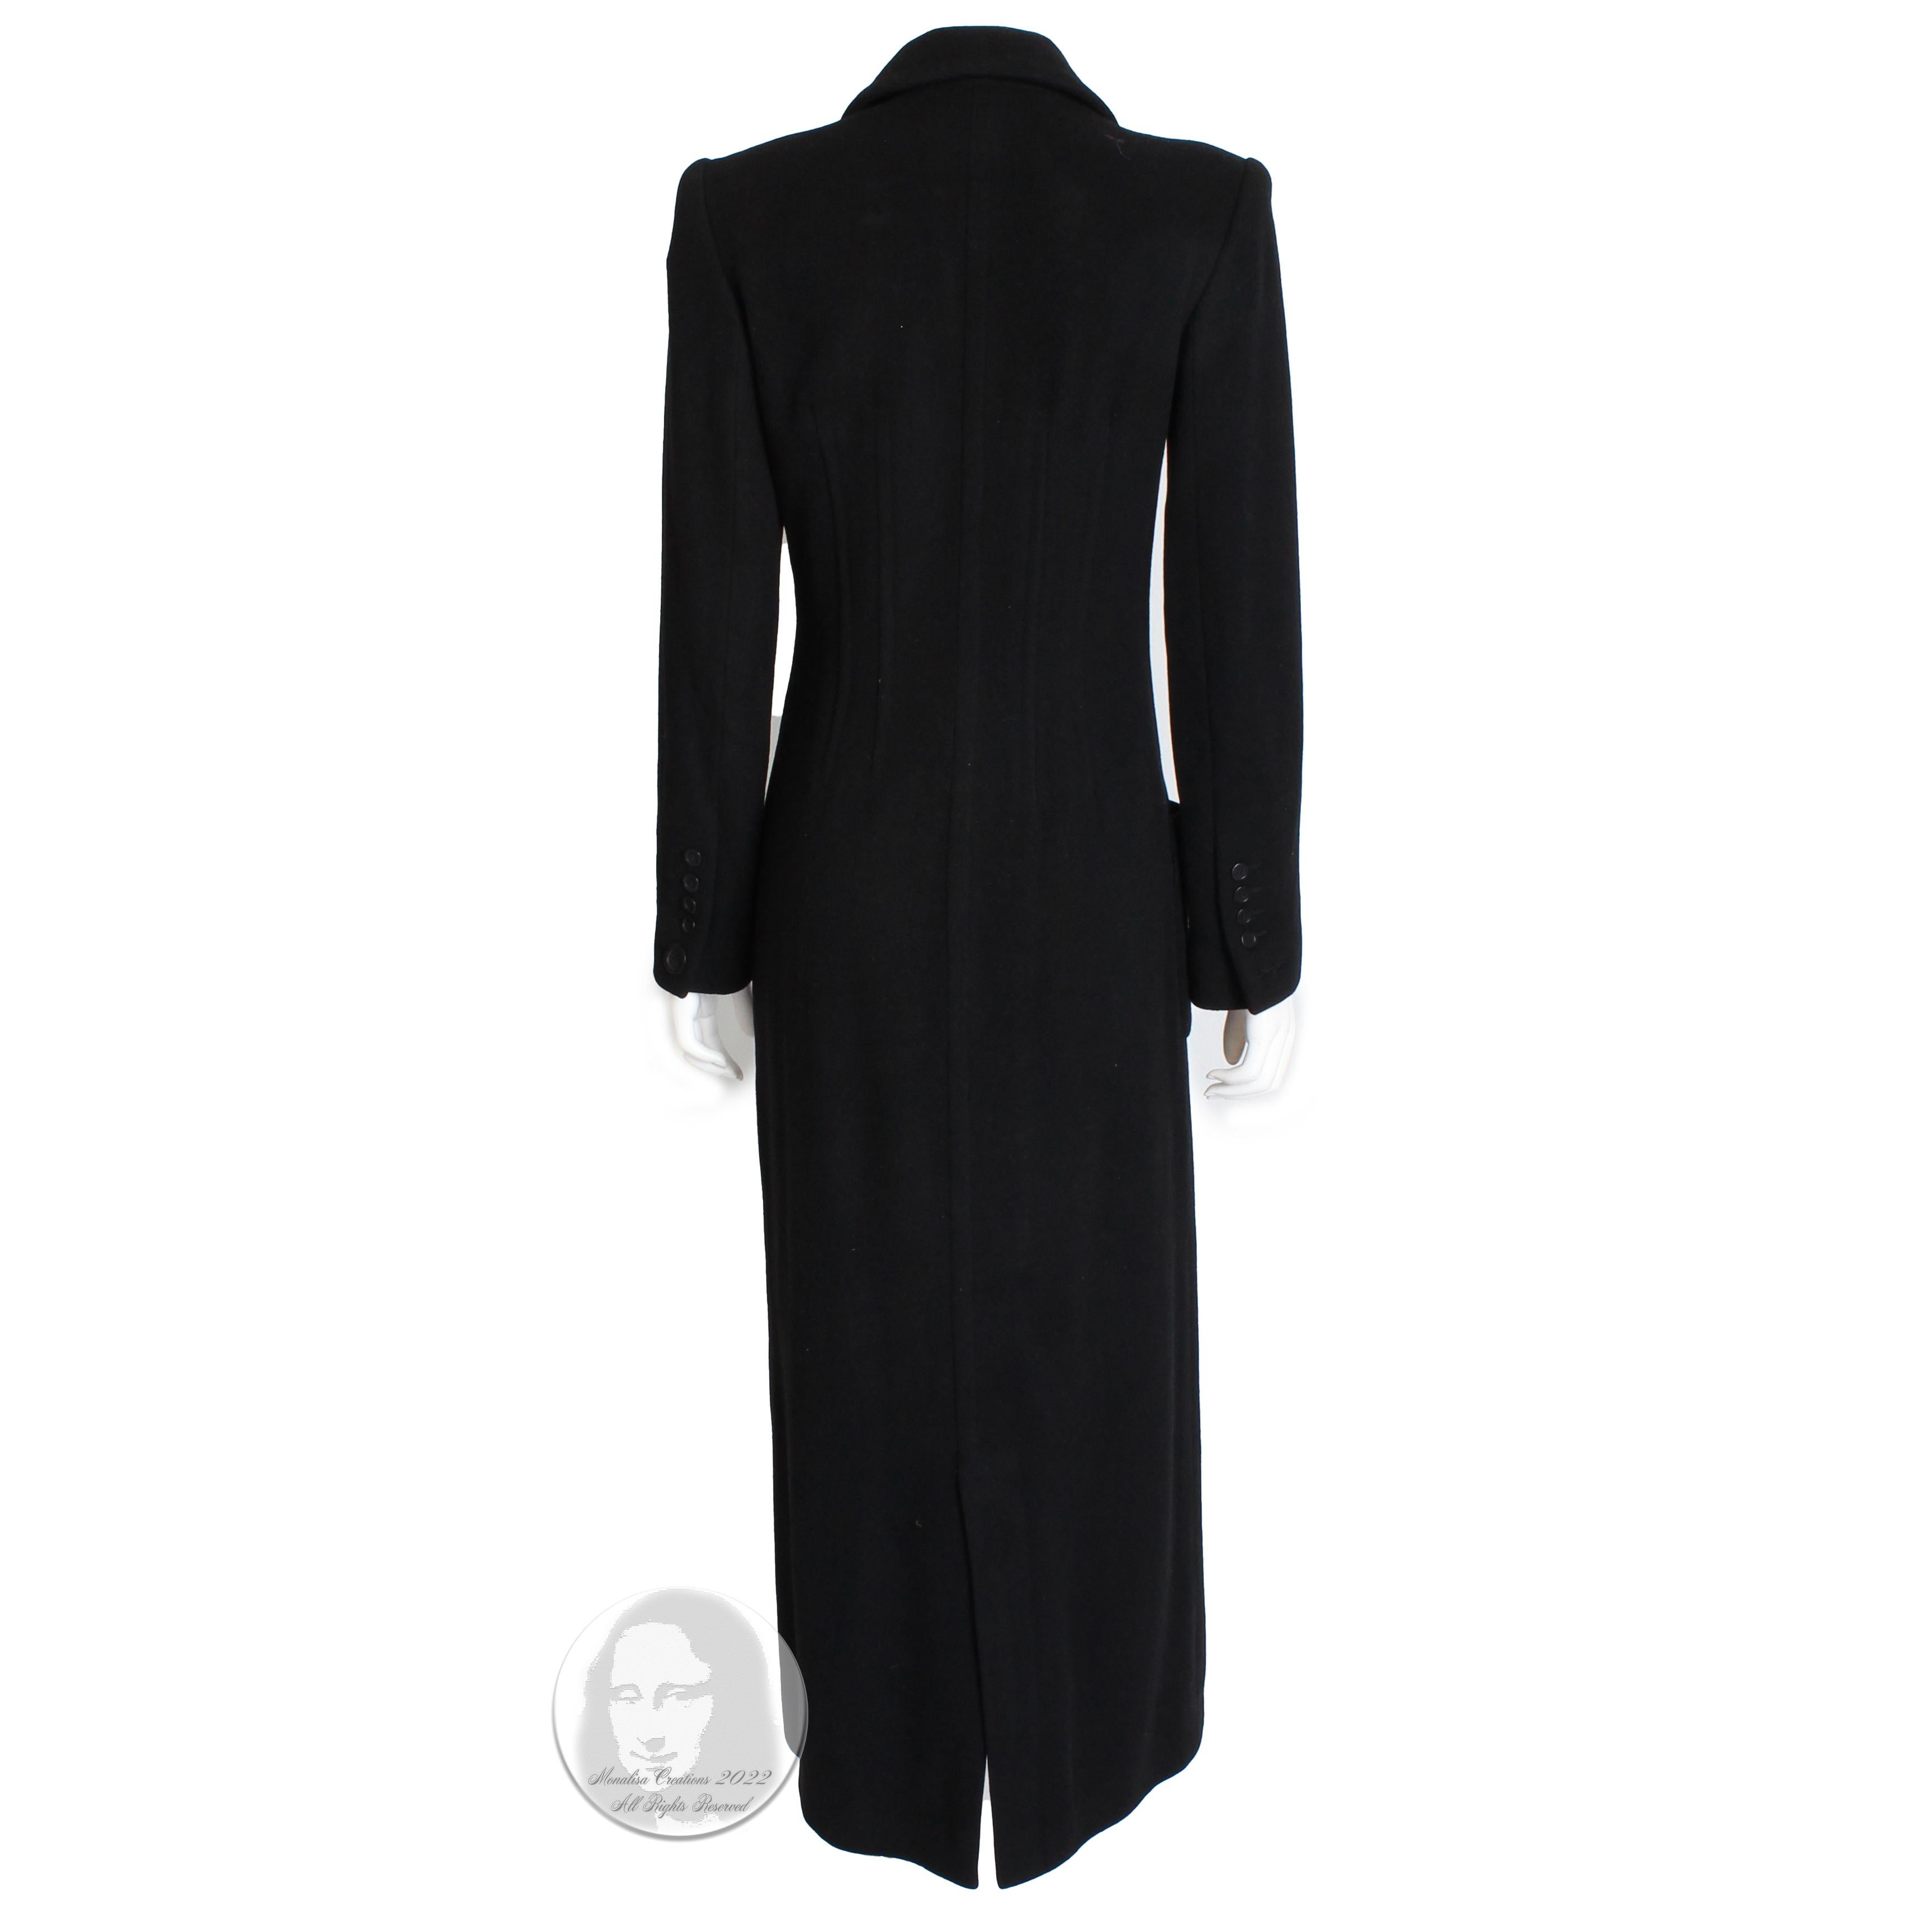 Sonia Rykiel Cashmere Coat Black Double Breasted Long Trench Style Sz 38 Vintage 2